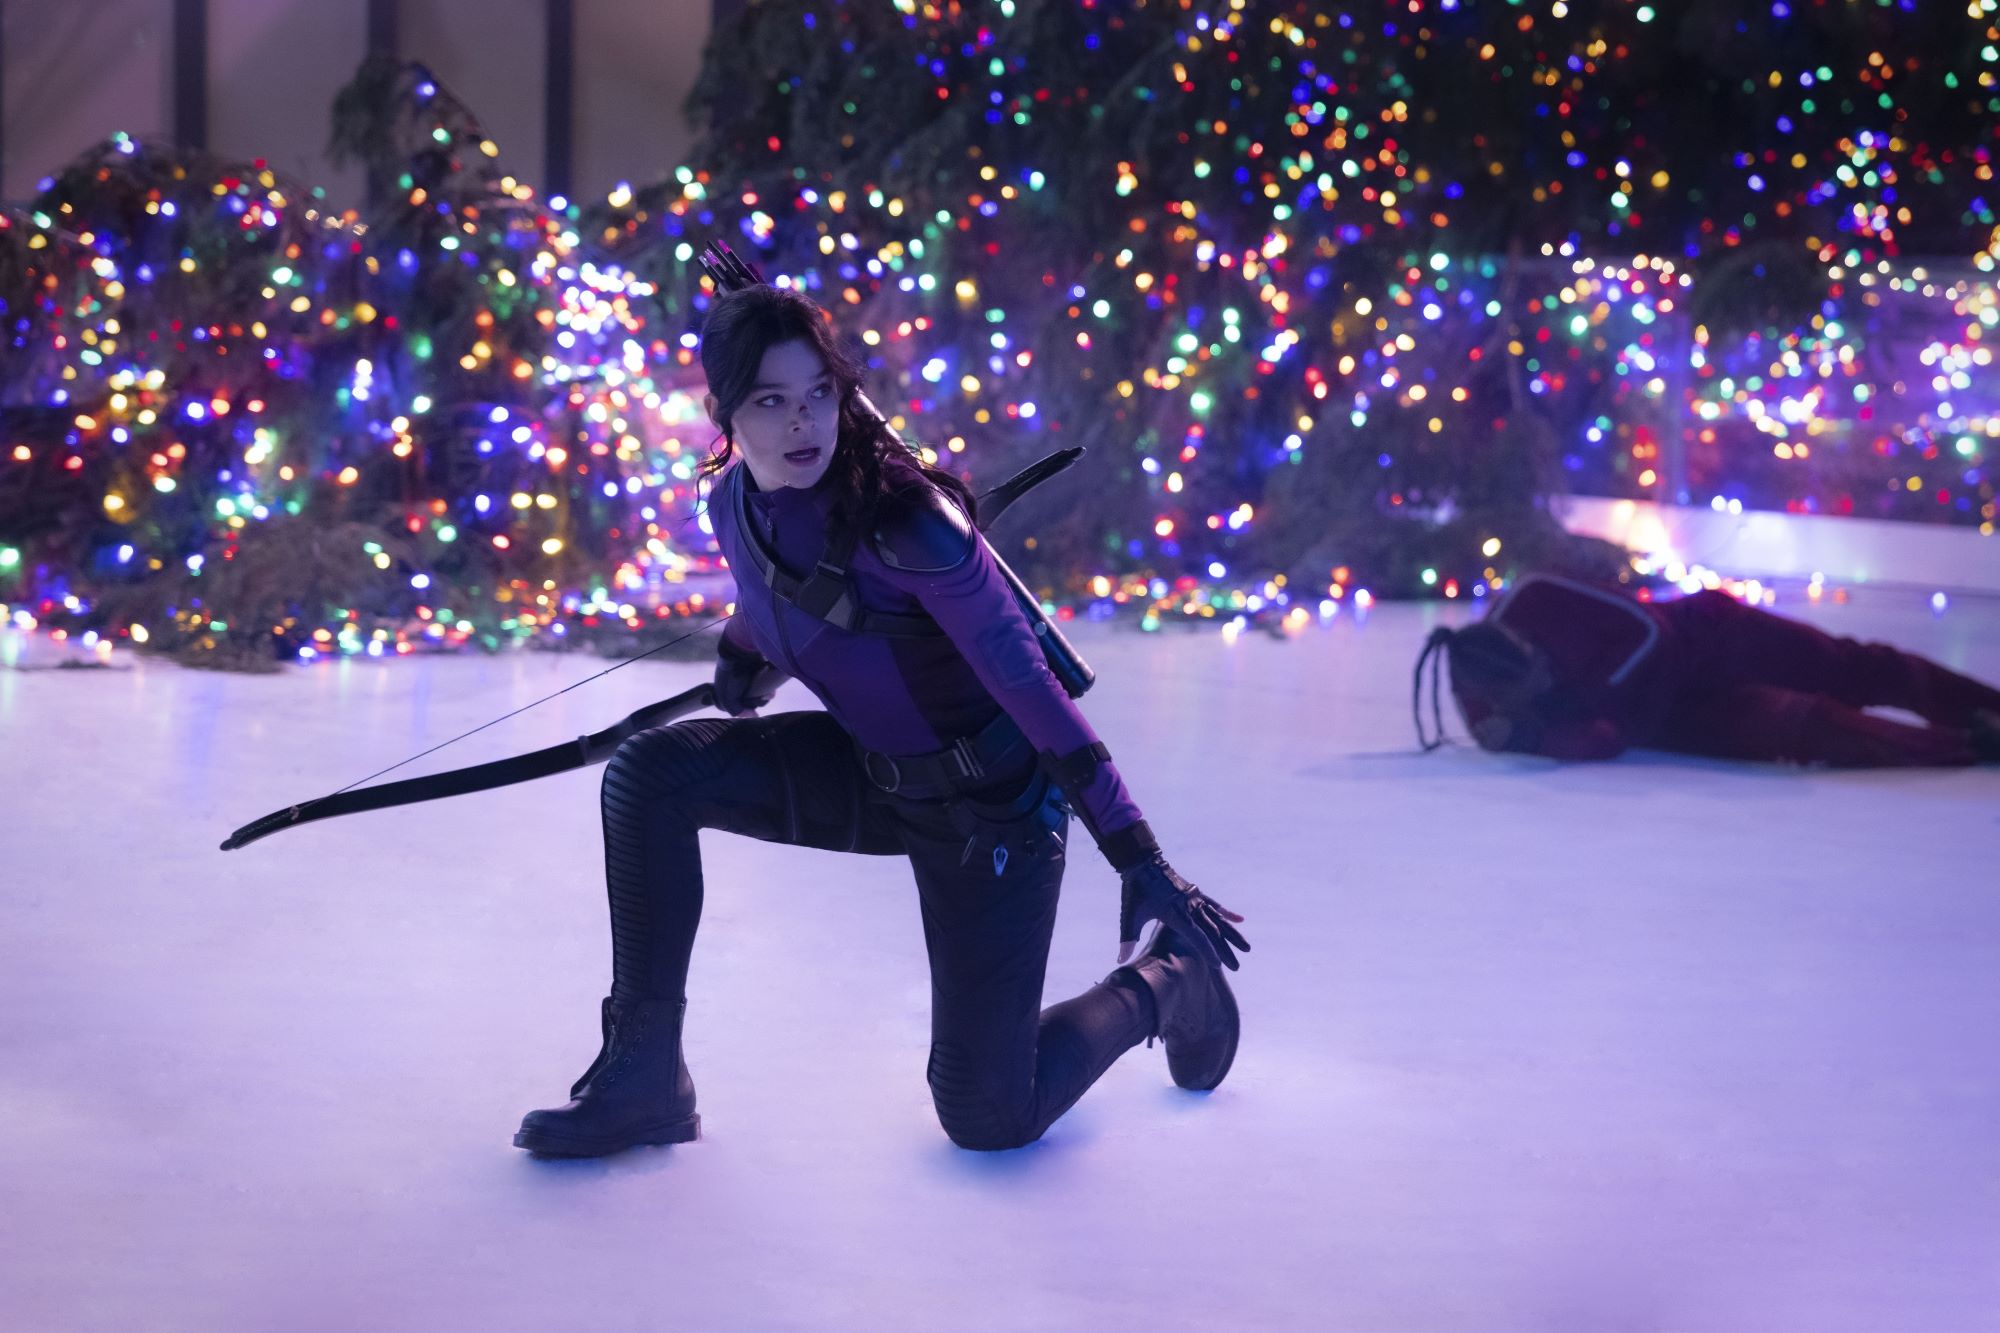 Hailee Steinfeld, in character as Kate Bishop in 'Hawkeye' Episode 6, wears her purple superhero suit and has her bow in her hand.